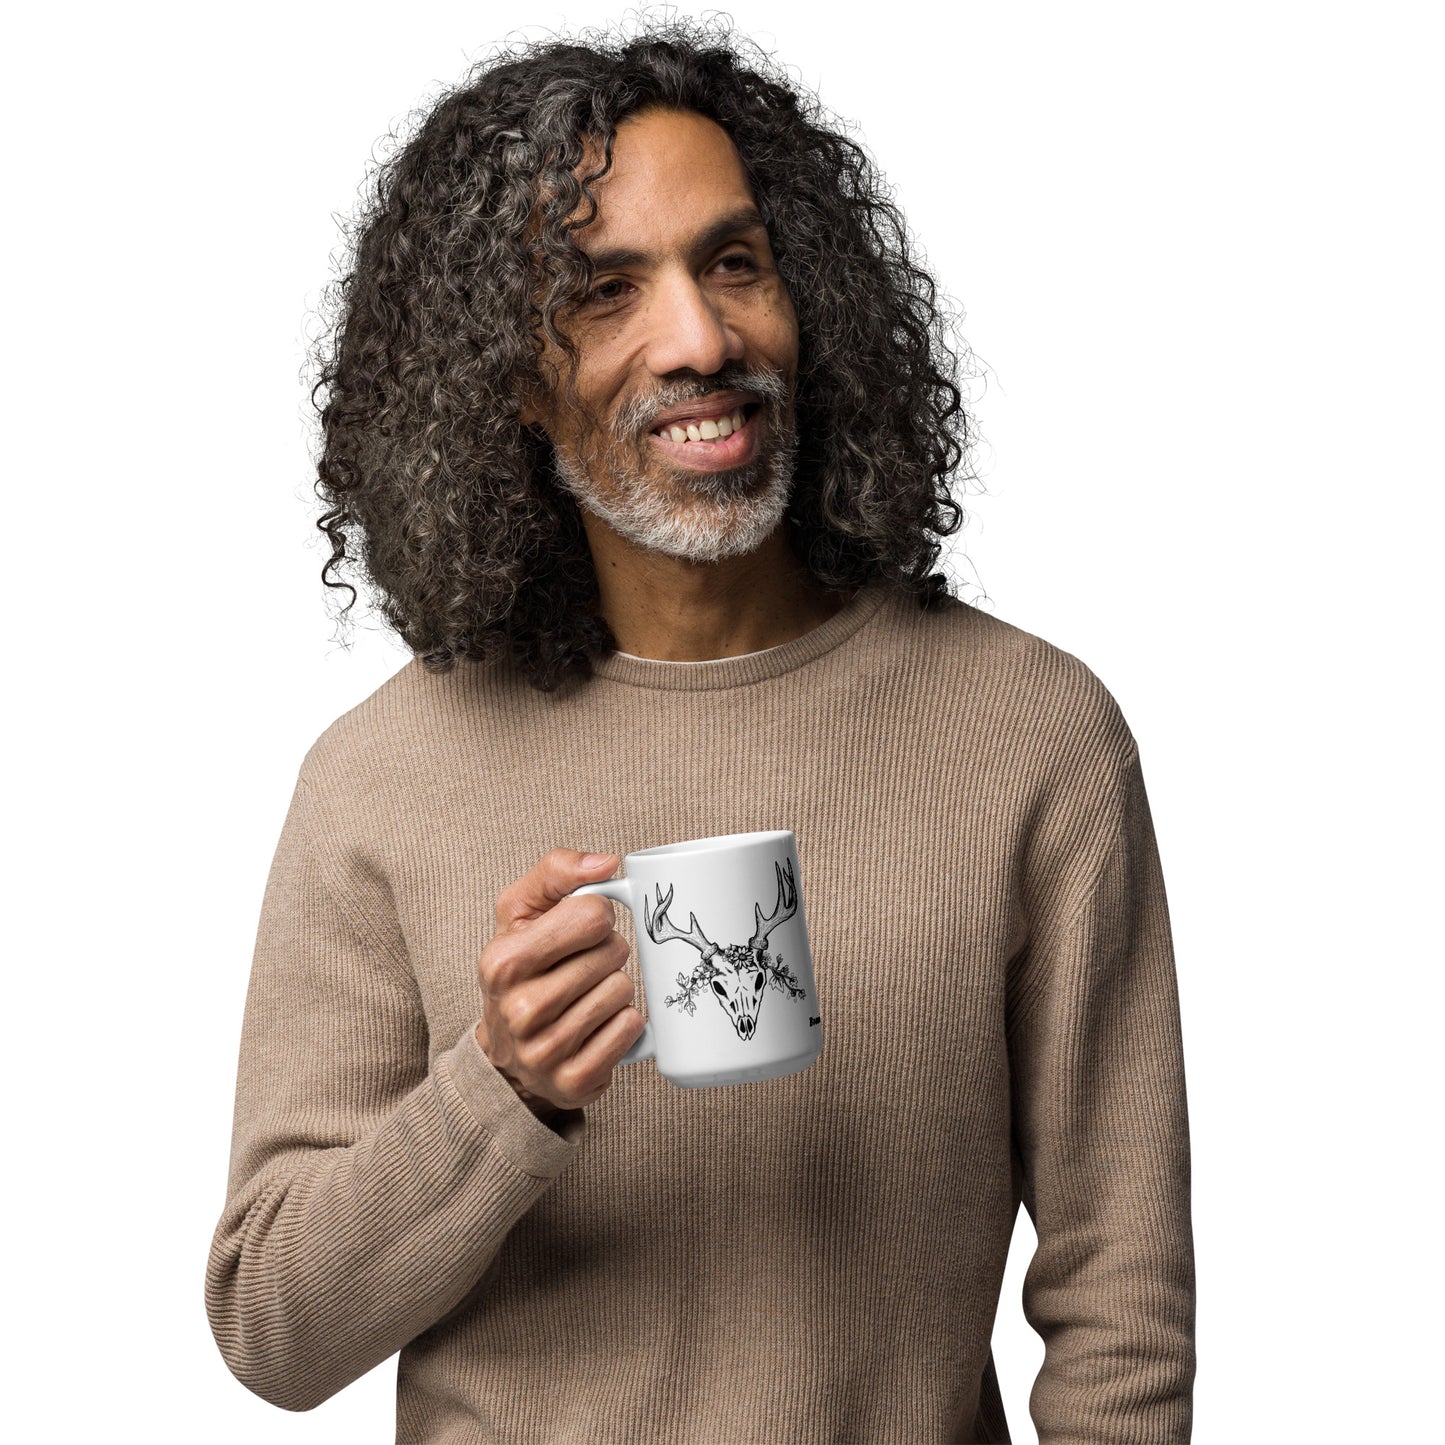 15 oz white ceramic mug. Features a double-sided hand illustrated image of a deer skull wreathed in flowers. Shown being held in male model's hand.